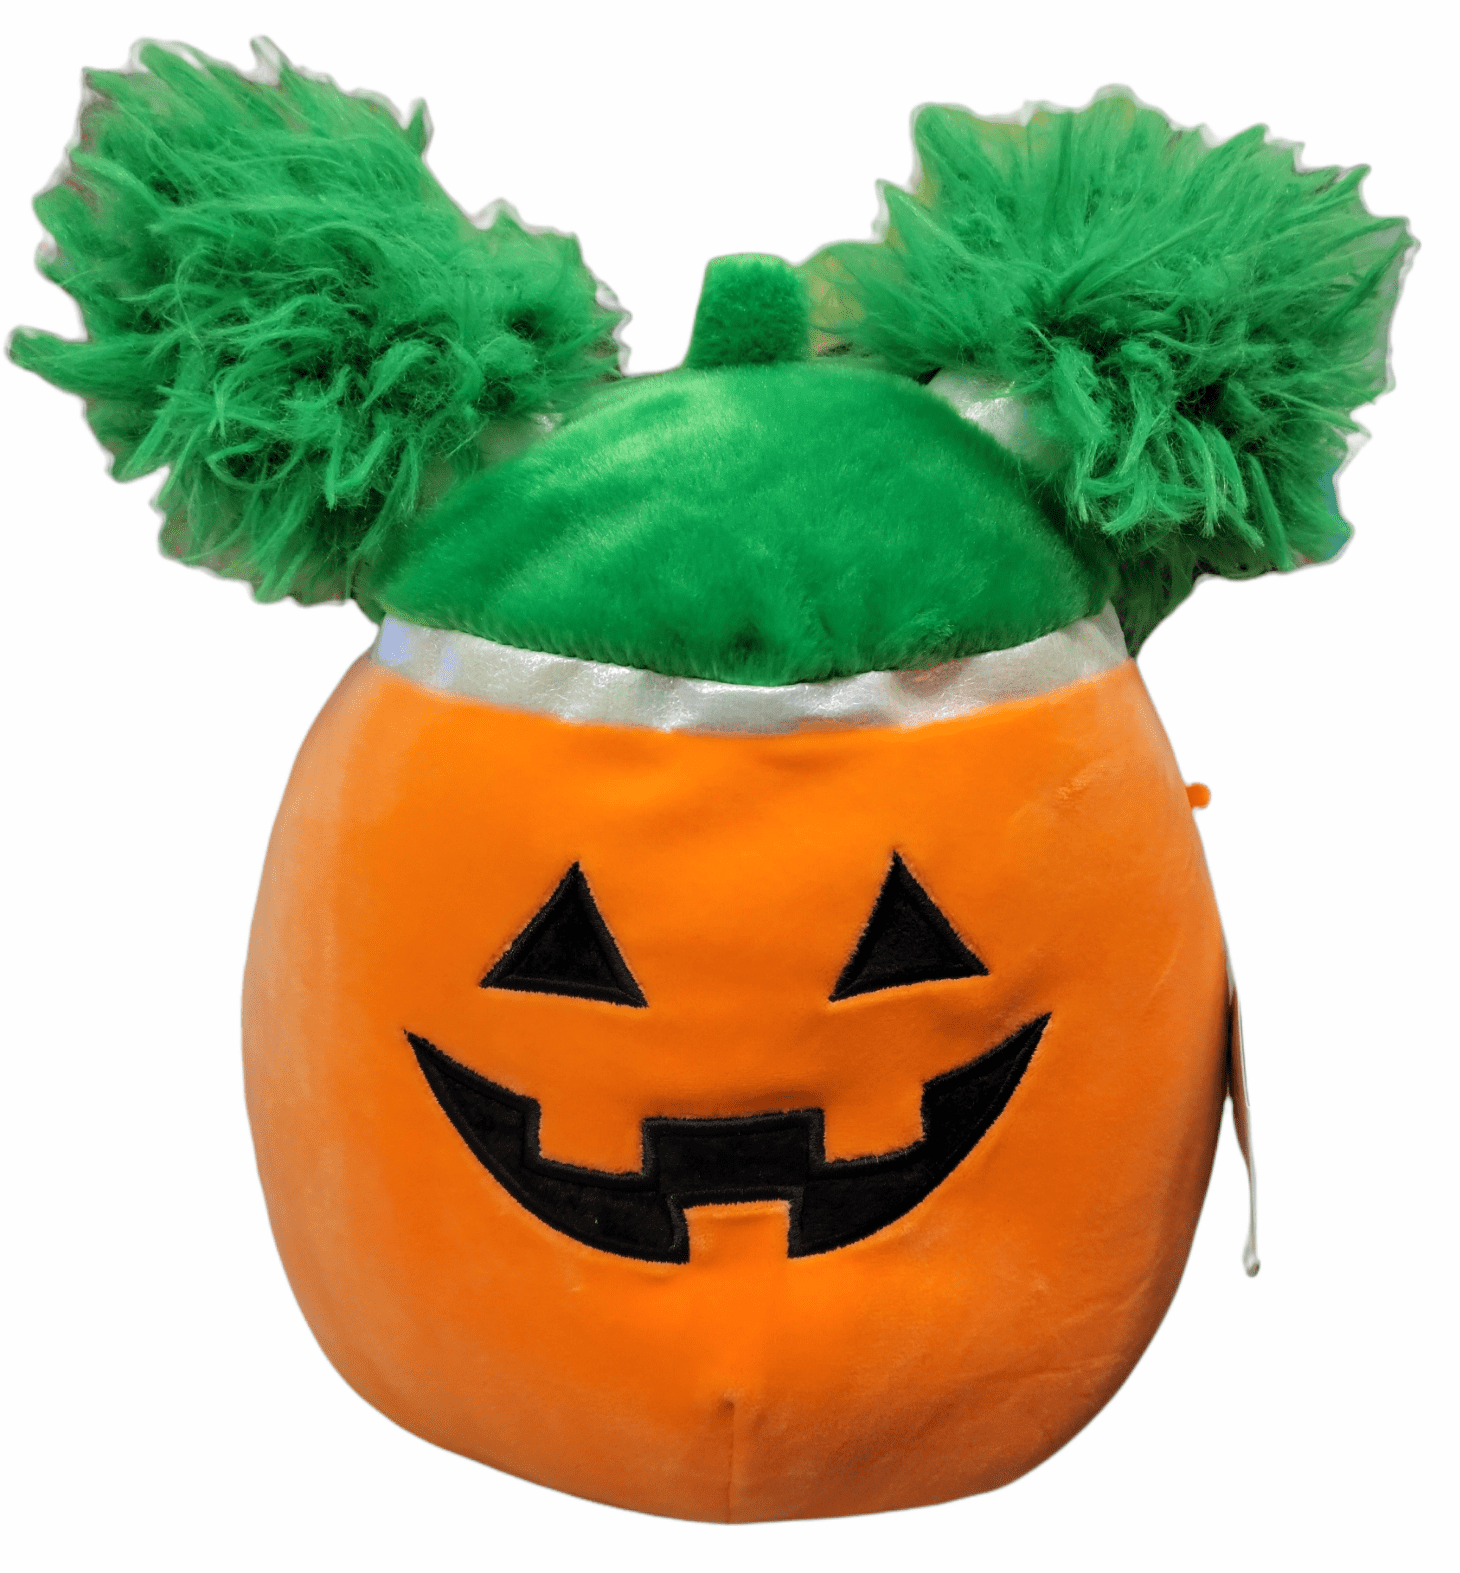 Squishmallows Official Black Halloween 16" Paige the Pumpkin Plush Animal Toy